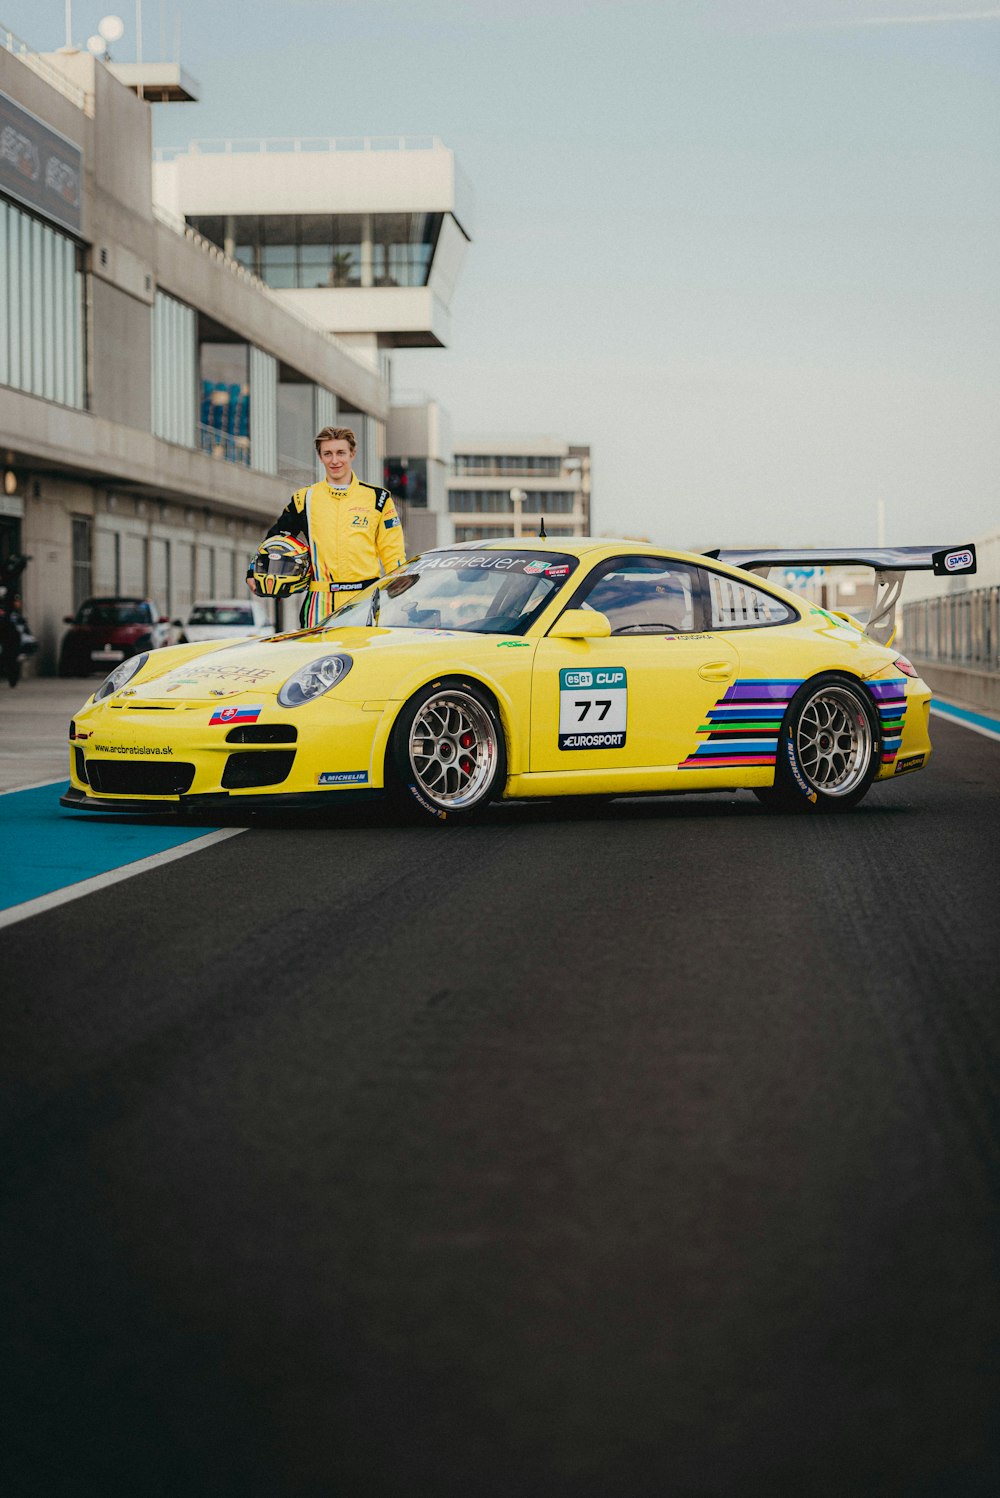 a man standing next to a yellow car on a race track